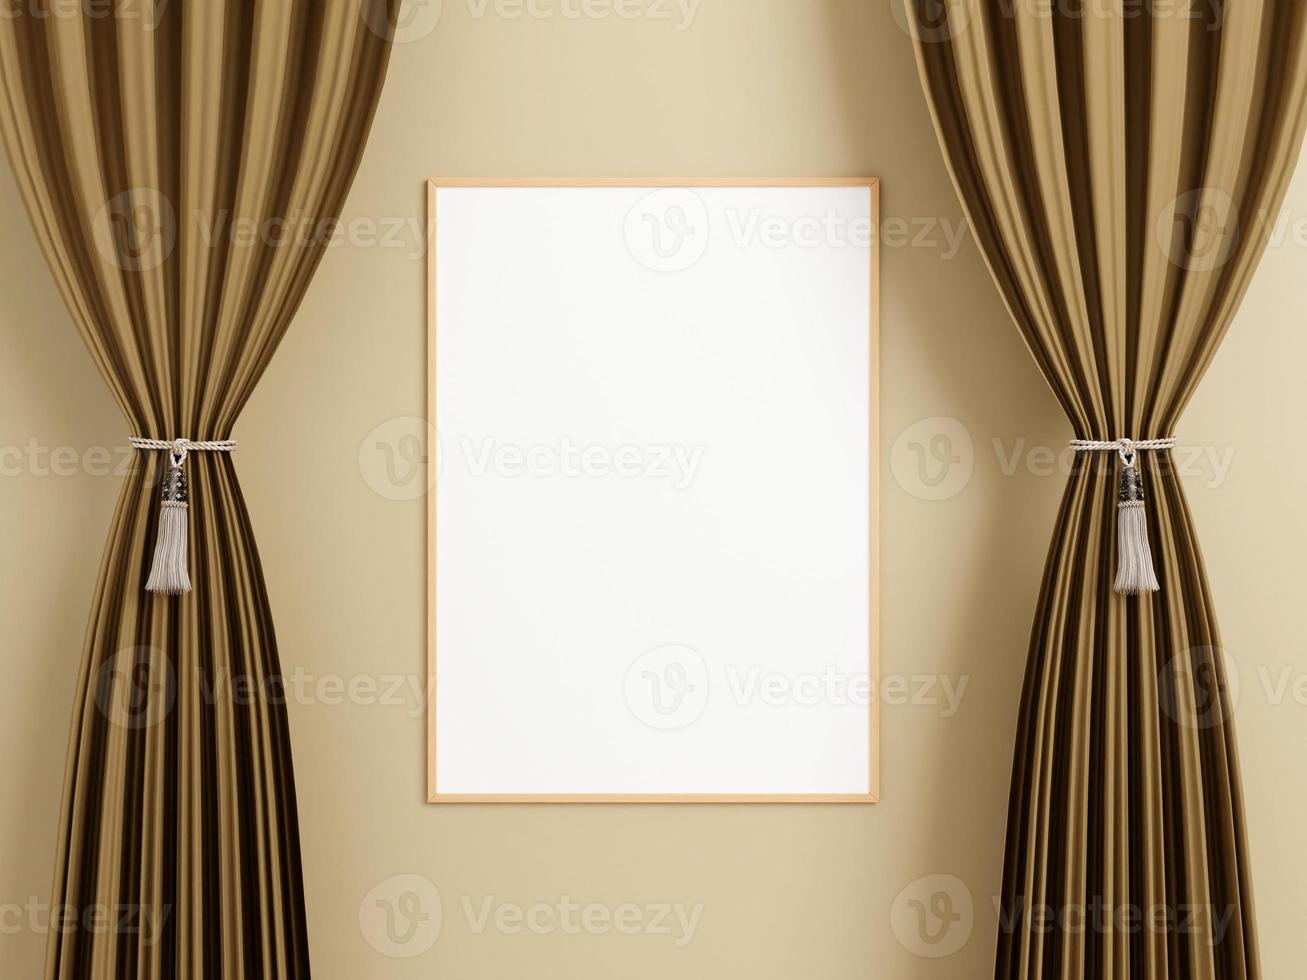 Minimalist vertical wooden poster or photo frame mockup on the wall between the curtain.